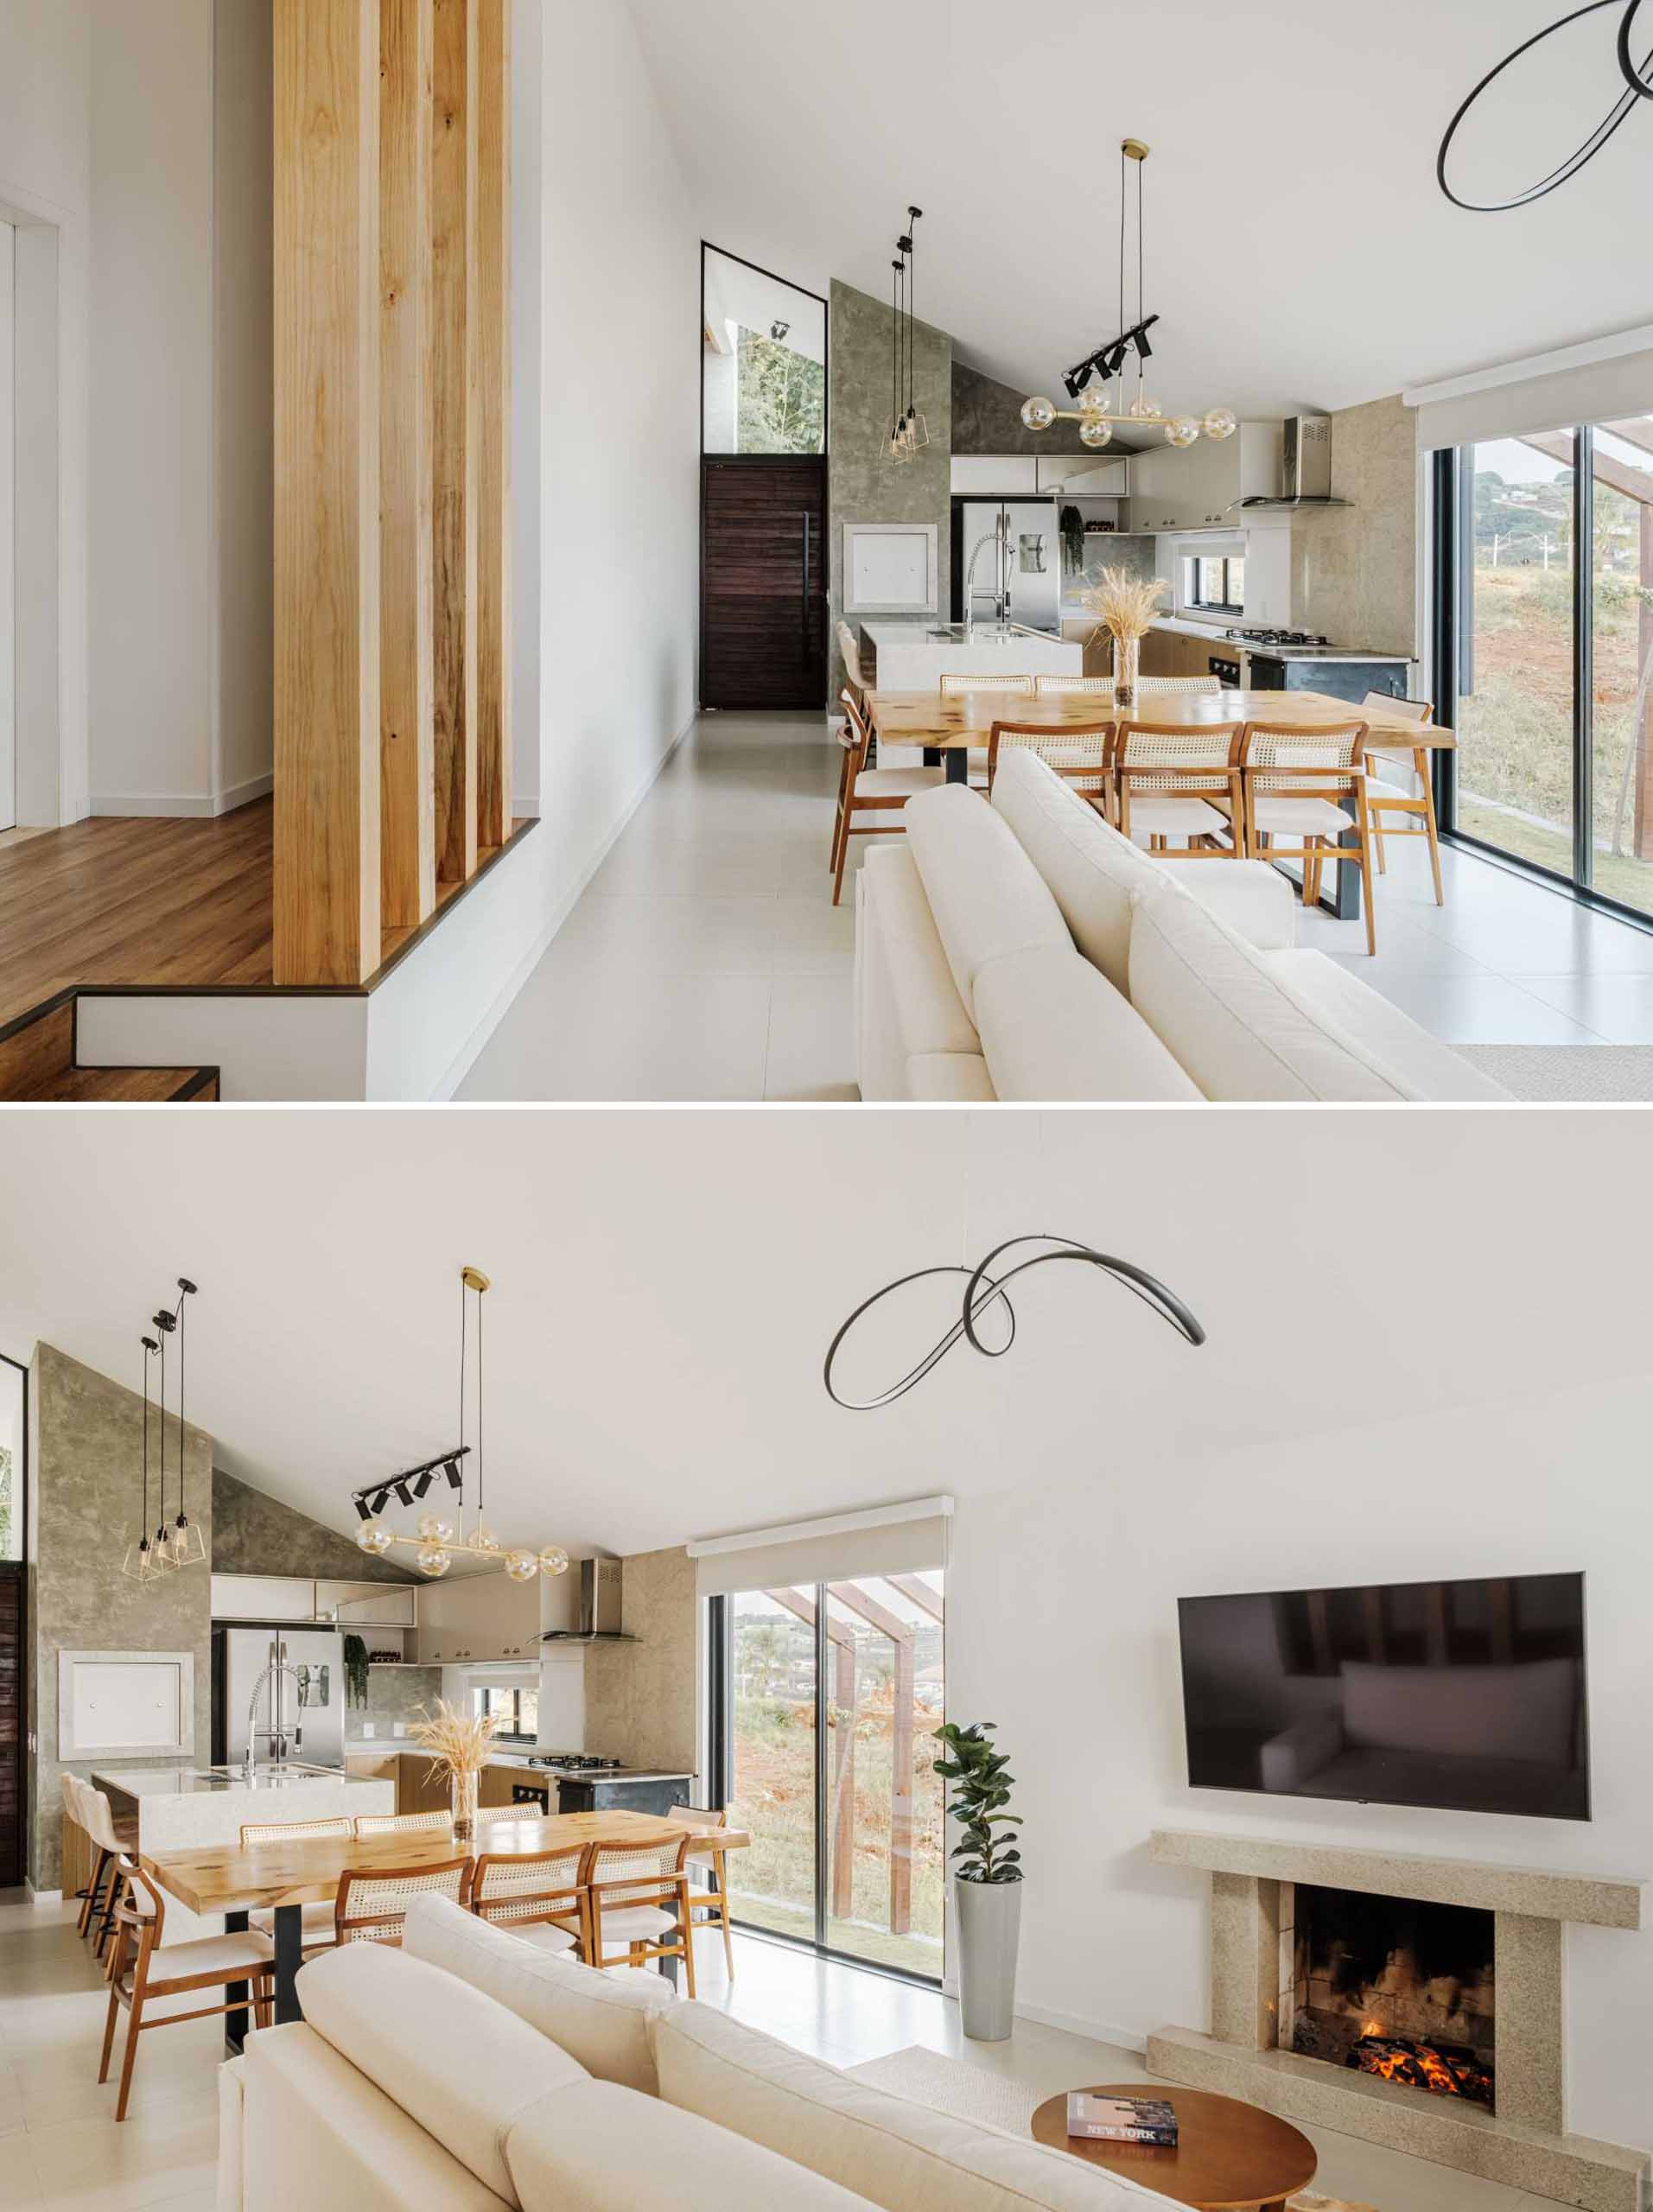 The palette of materials c،sen in this modern open-plan interior, unites wood, linen, and burnt cement, which are all enhanced by the white walls and ceiling.